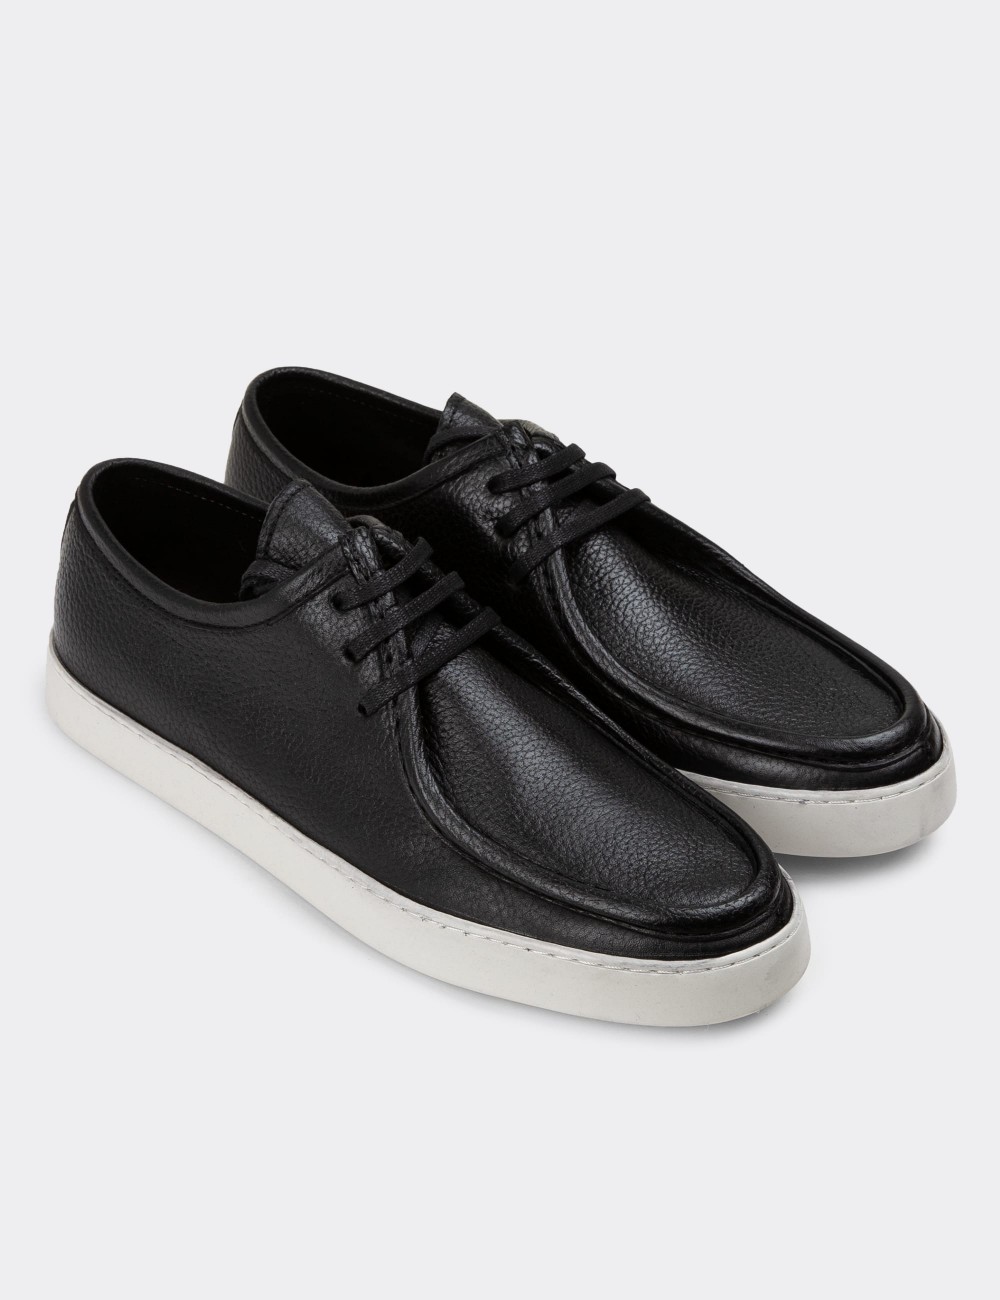 Black Leather Sneakers - 01926MSYHC01